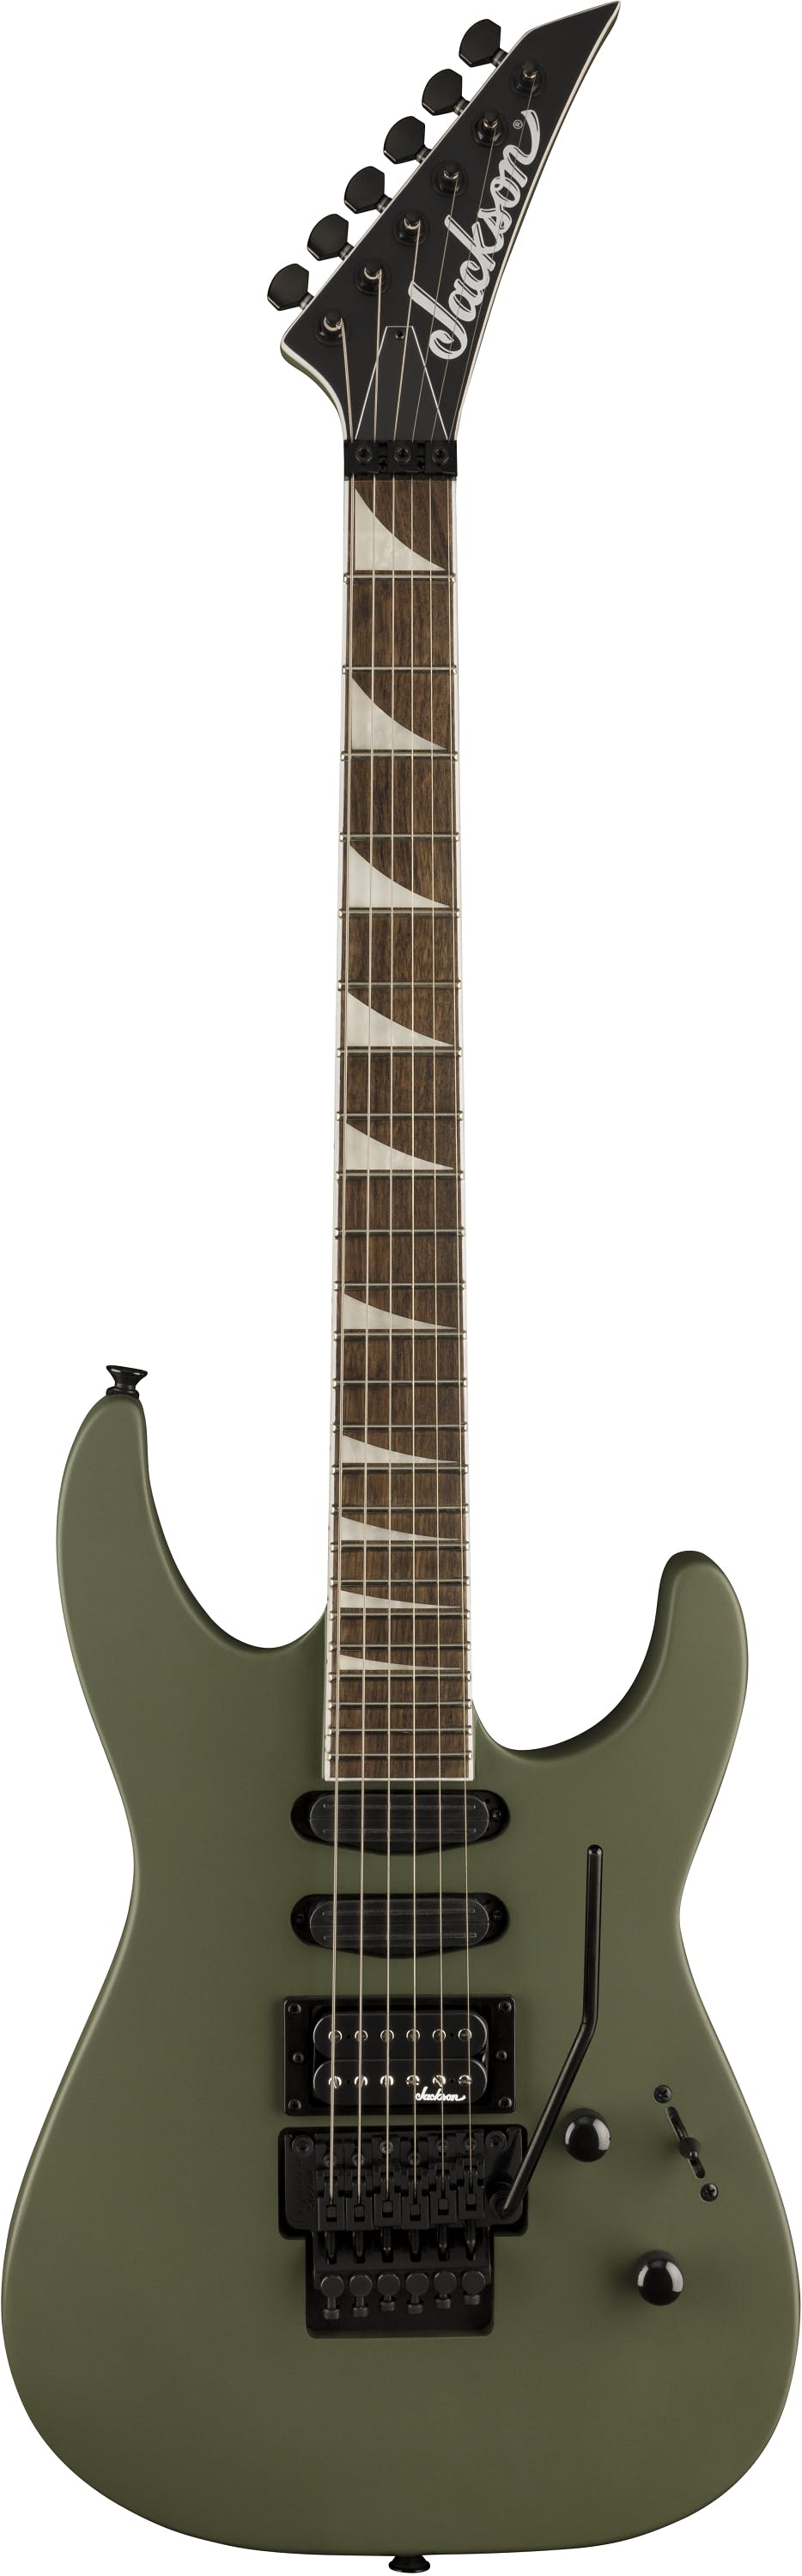 Jackson X Series Soloist SL3X DX Electric Guitar in Matte Army